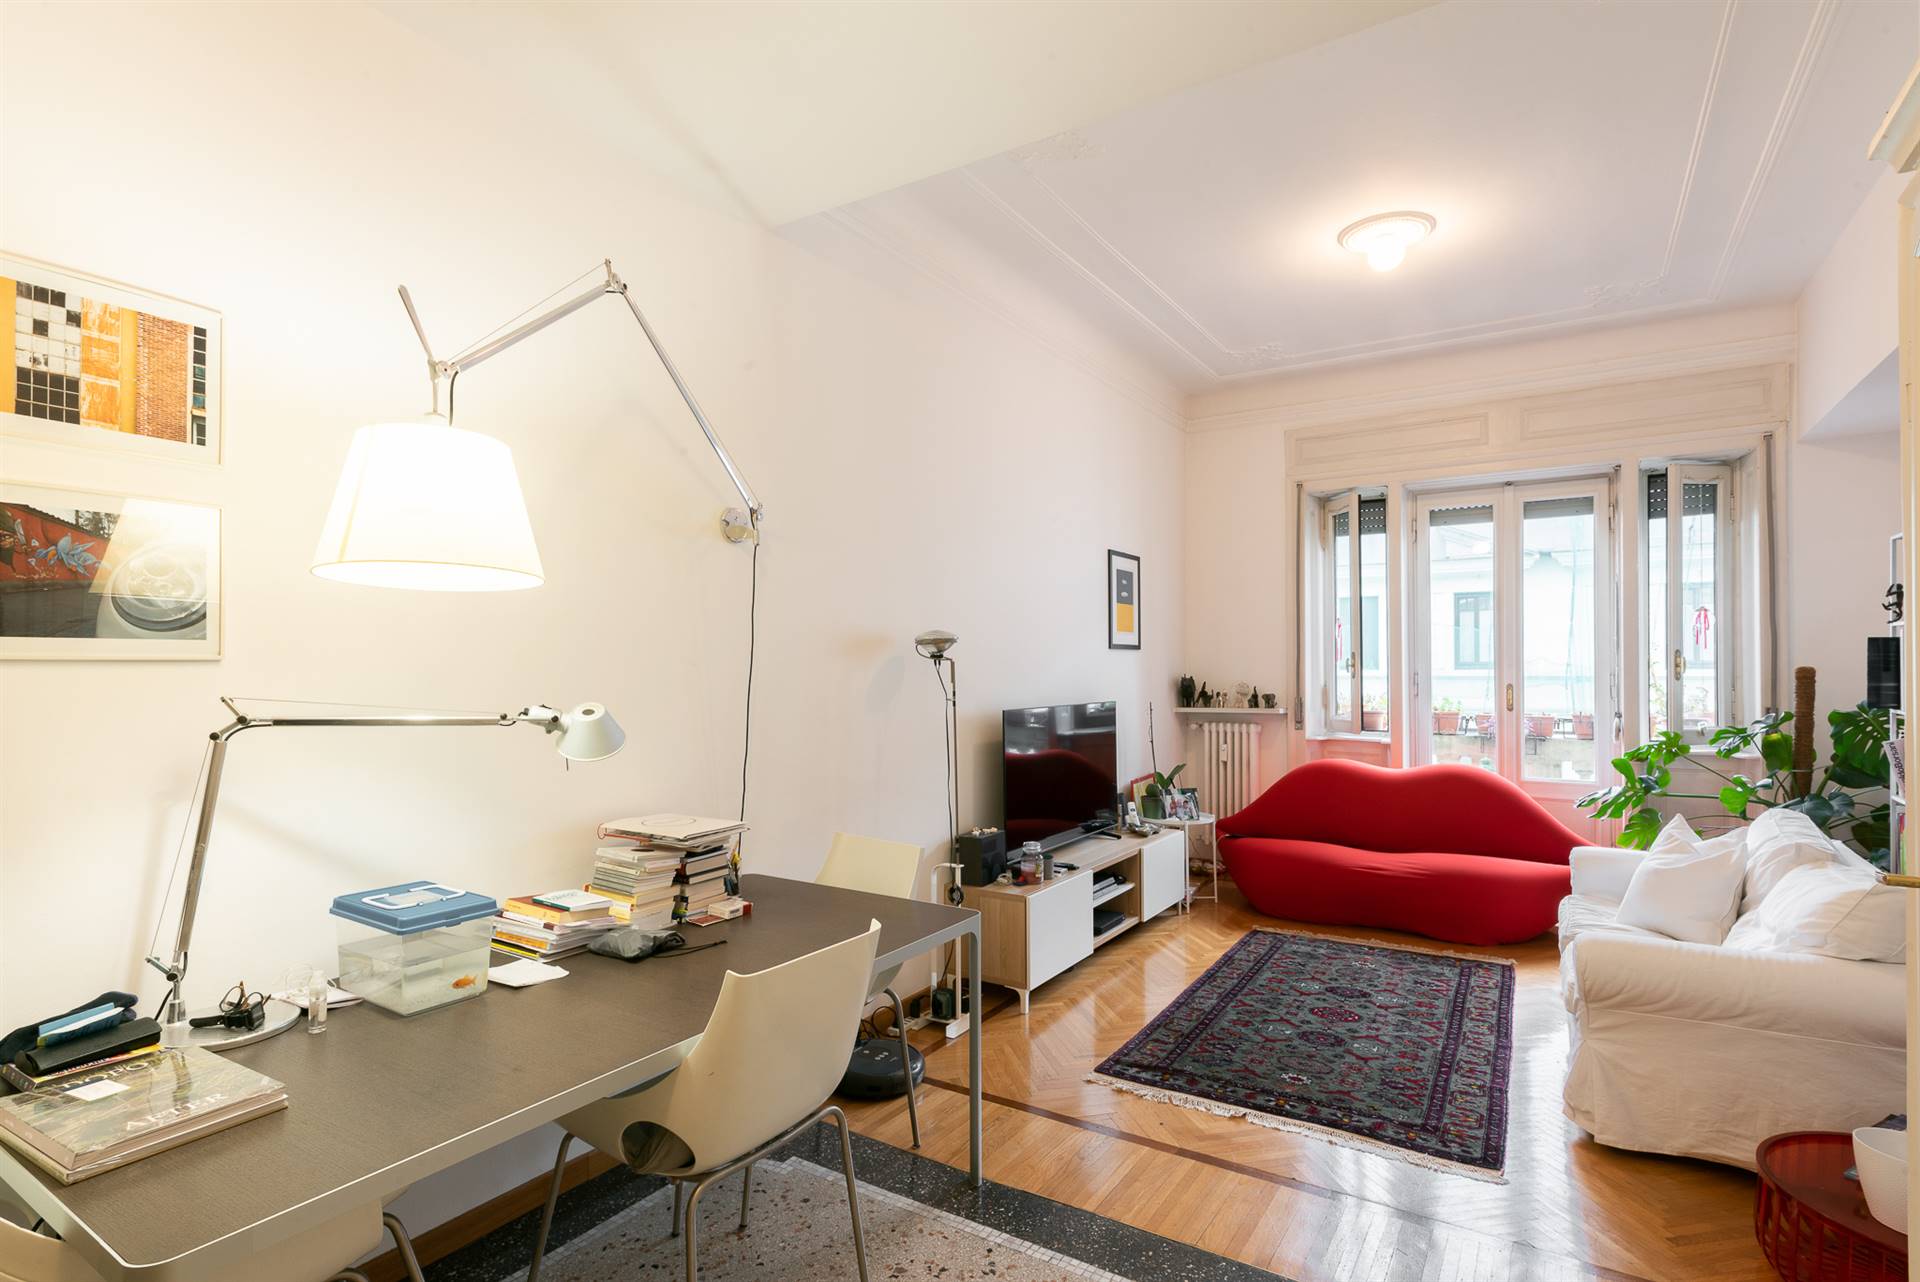 DATEO, MILANO, Apartment for sale of 103 Sq. mt., Good condition, Heating Centralized, Energetic class: F, Epi: 182,37 kwh/m2 year, placed at 4° on 6,